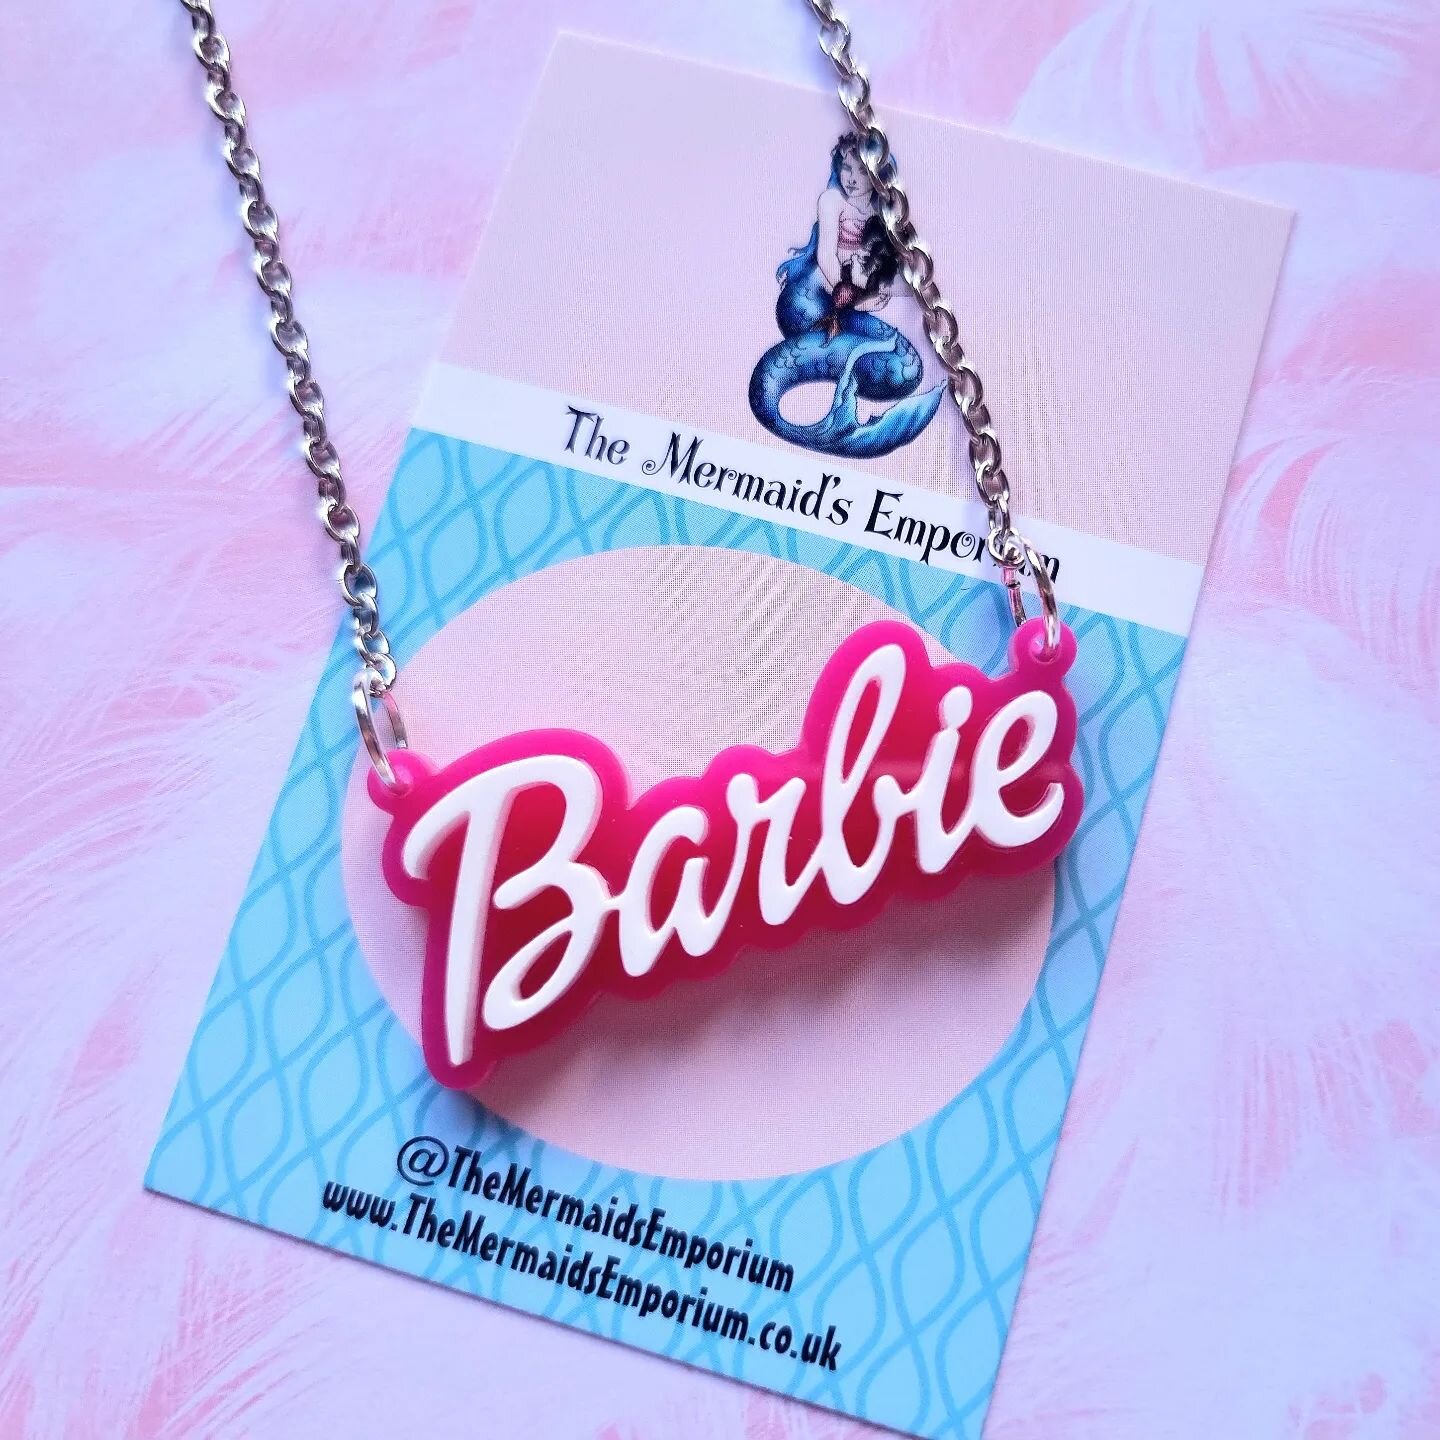 OK ok who else is excited for the Barbie Movie?!

#barbie #barbiestyle #barbiegirl #margotrobbie #barbieandken #ryangosling #barbiedoll #barbiecollector #barbiefashion #barbiegram #barbieworld #barbiejewelry #barbiemovie #barbie2023 #barbiethemovie #